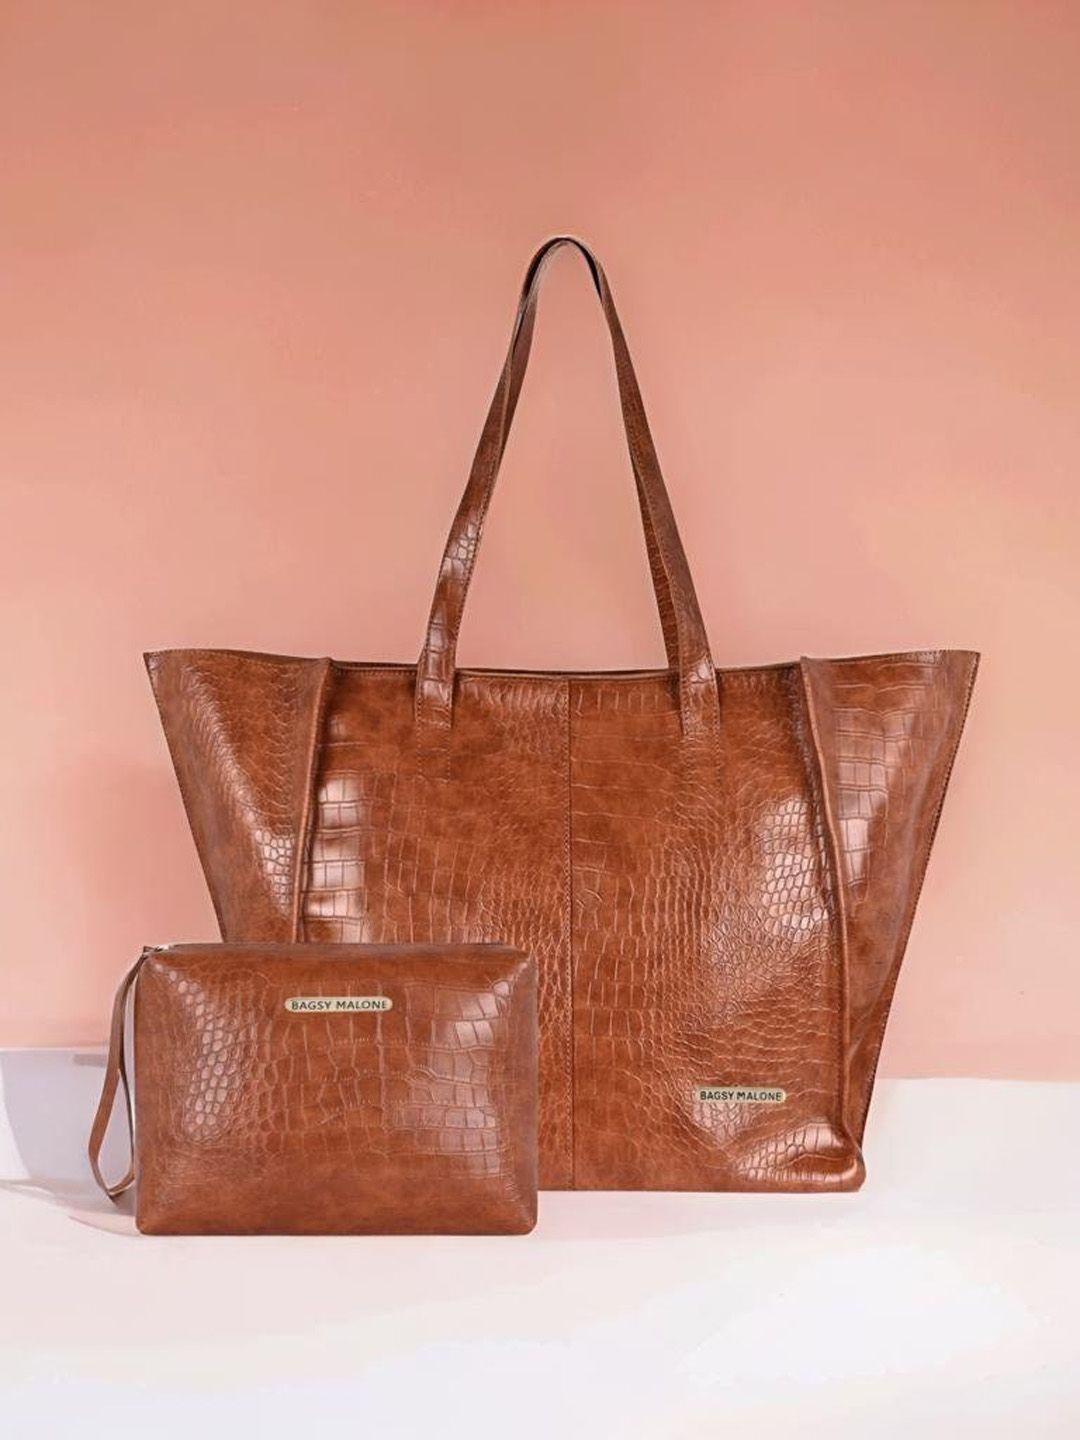 bagsy malone textured oversized leather shopper tote bag with pouch